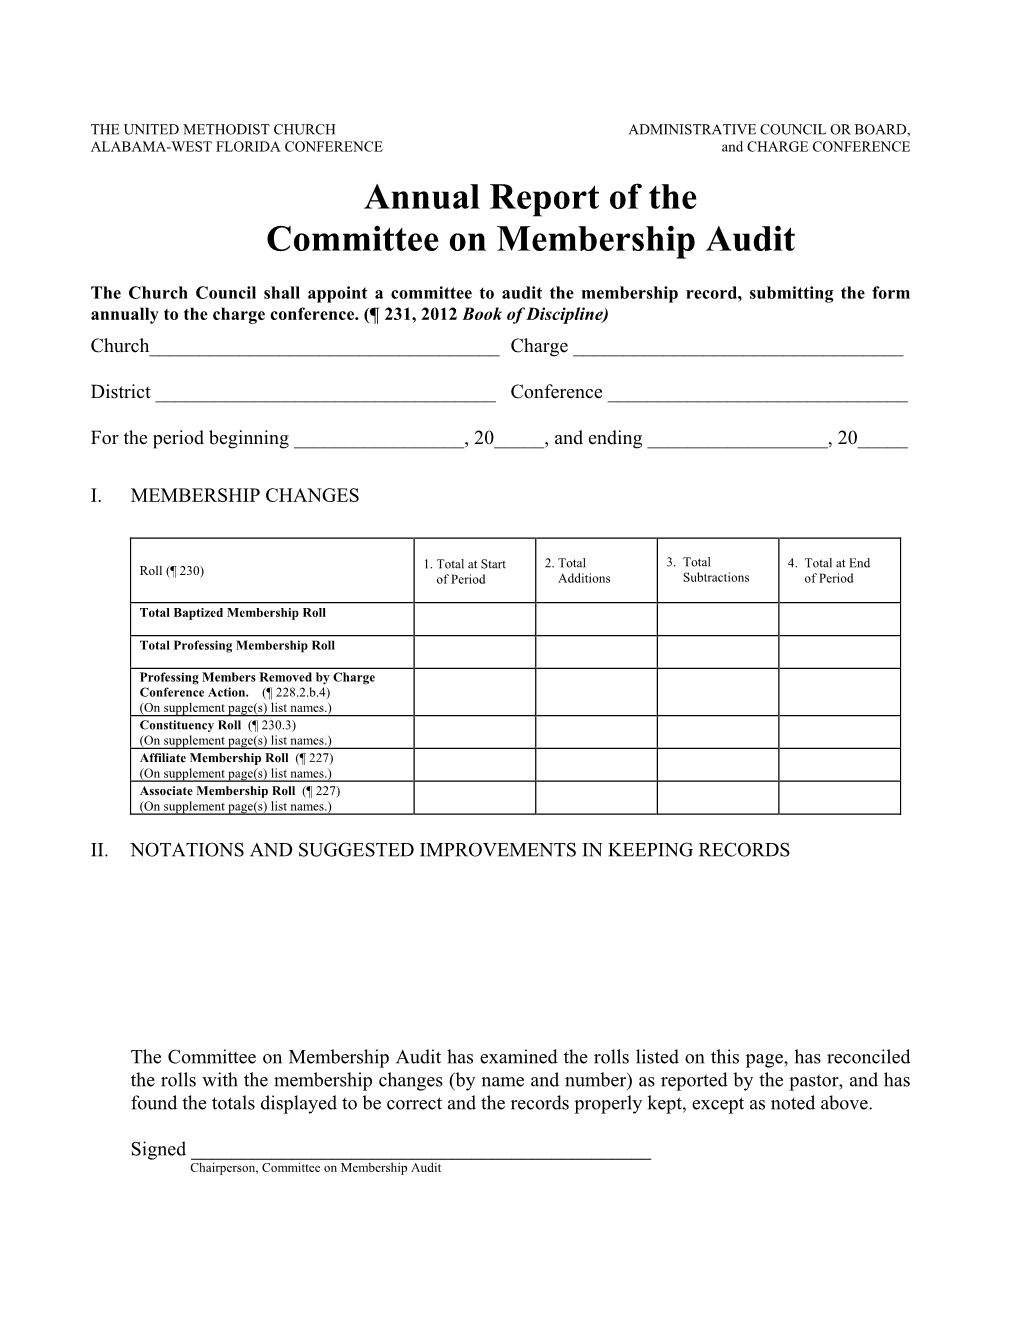 Annual Report of the Committee on Membership Audit